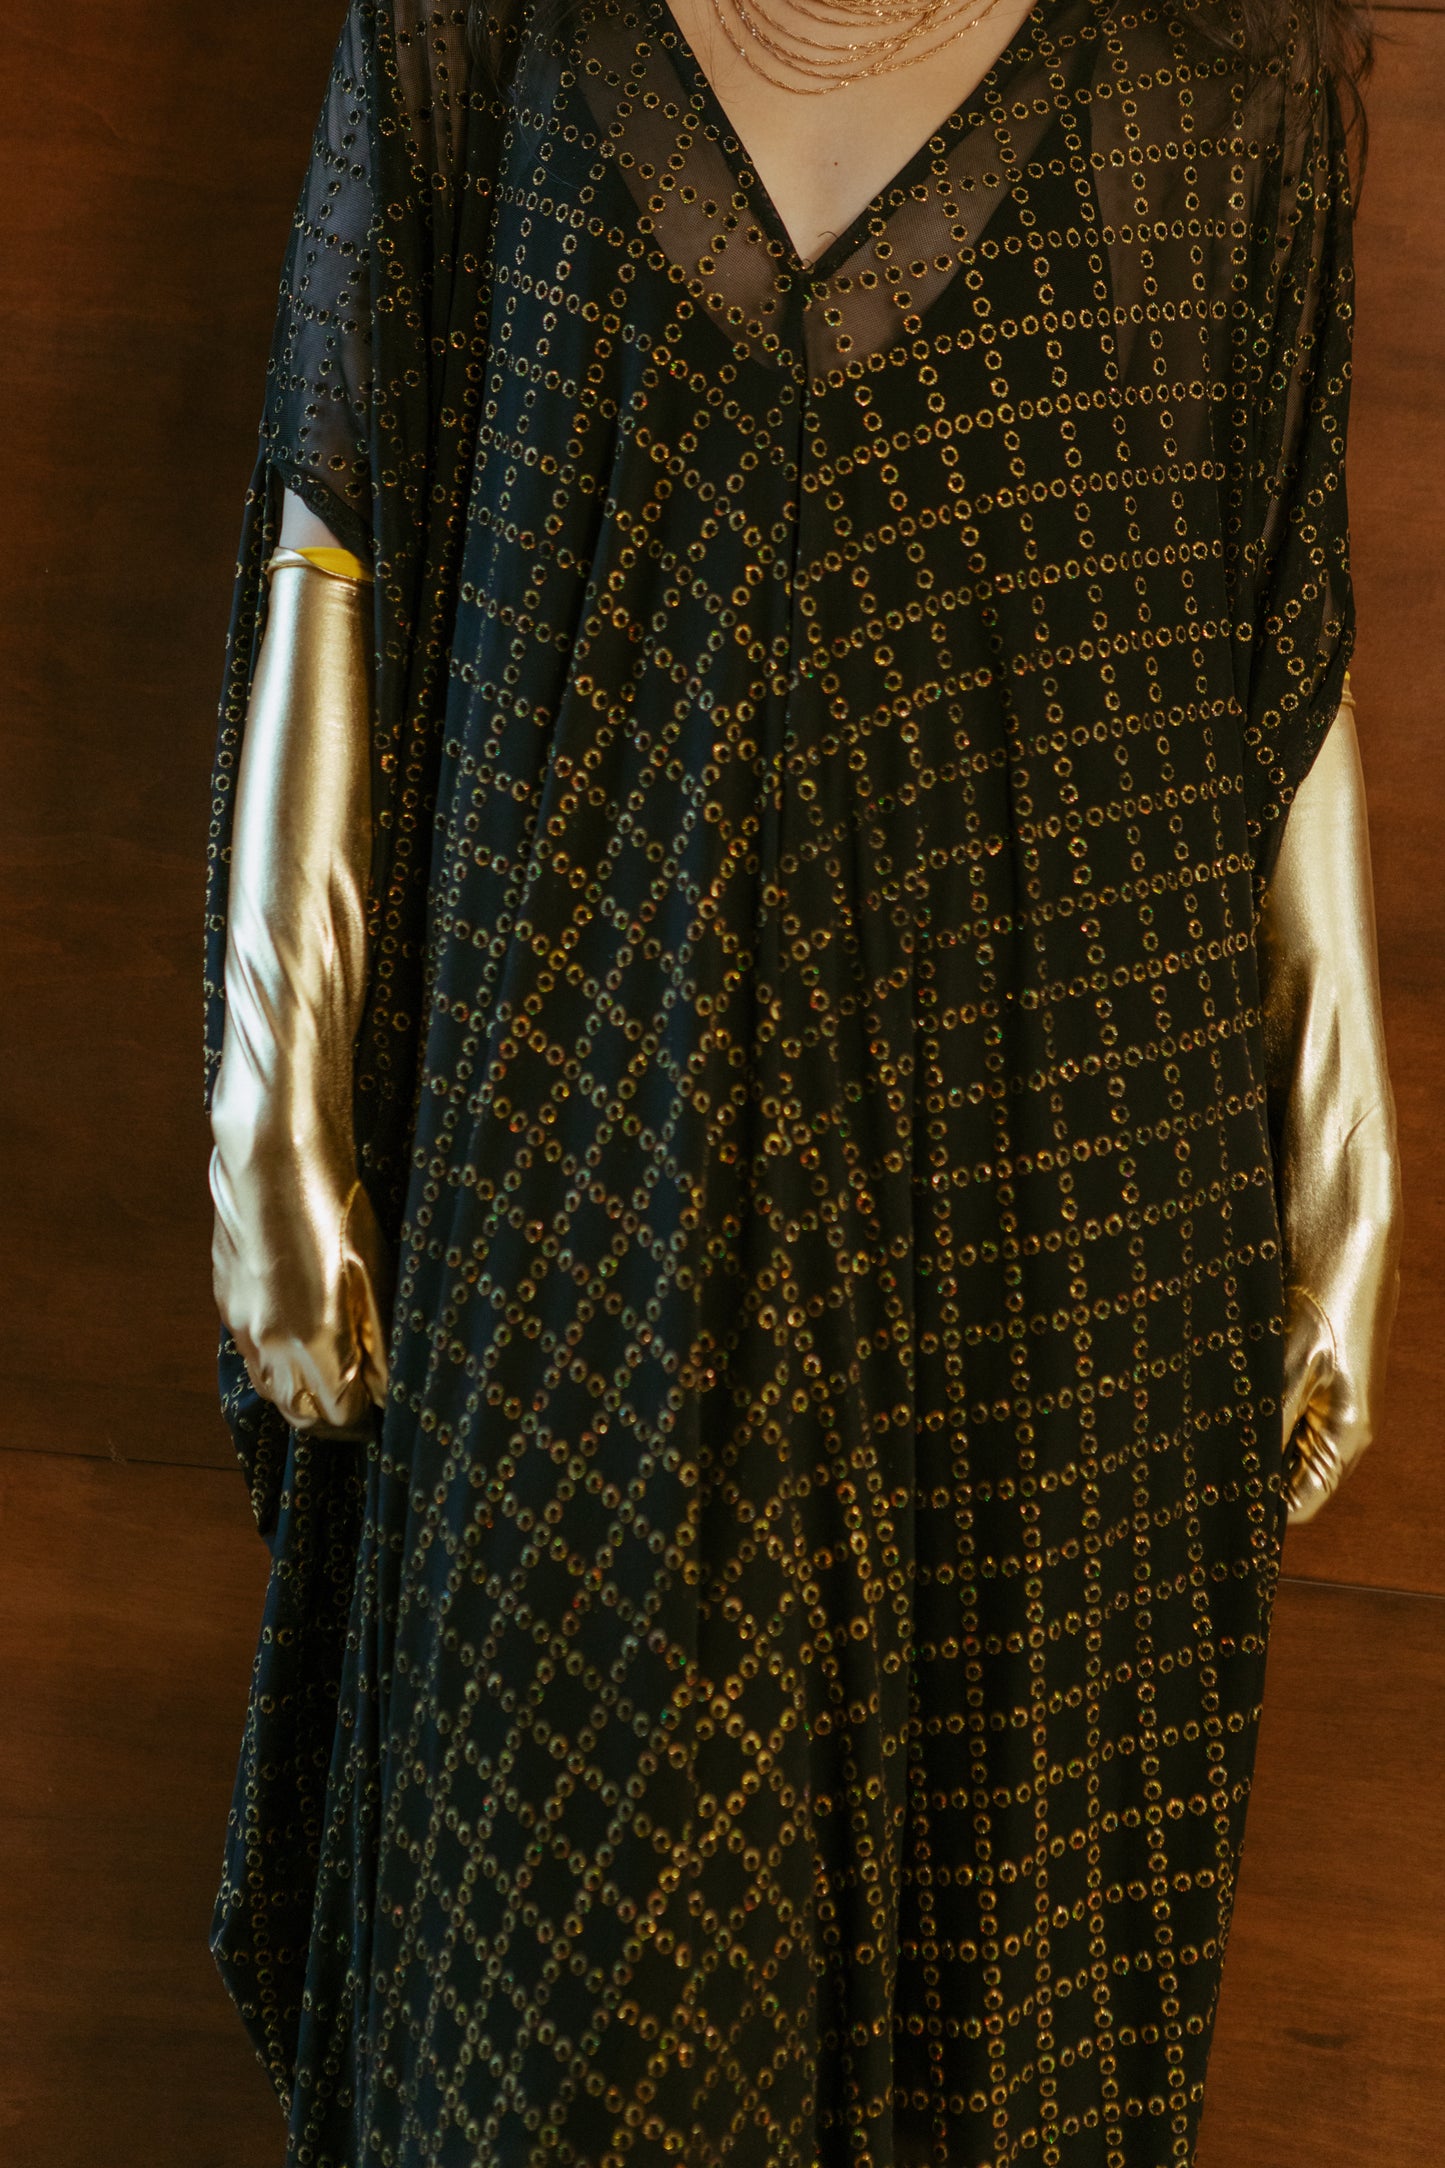 Black, sheer mesh caftan dress embellished with shimmering metallic gold circles in a geometric pattern that creates a sort of chain-link effect. Featuring a deep v-neckline, short batwing sleeves, and an ankle-length hem. This caftan is a voluminous garment that gives a flowy silhouette that drapes beautifully on all shapes.